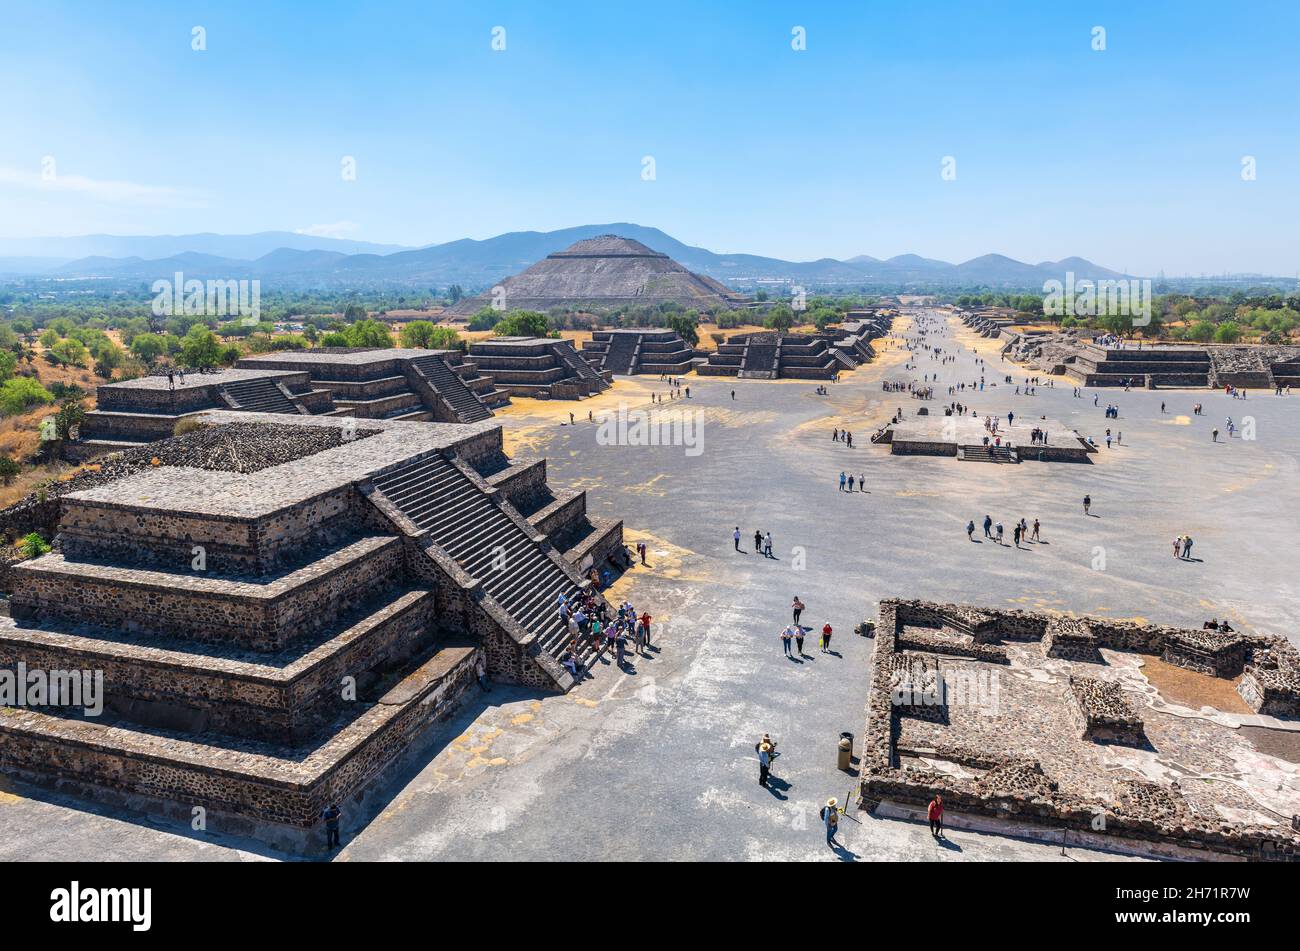 Teotihuacan archaeology site with Sun pyramid and Alley of the Dead seen from moon pyramid, Mexico. Focus on Sun Pyramid in background. Stock Photo